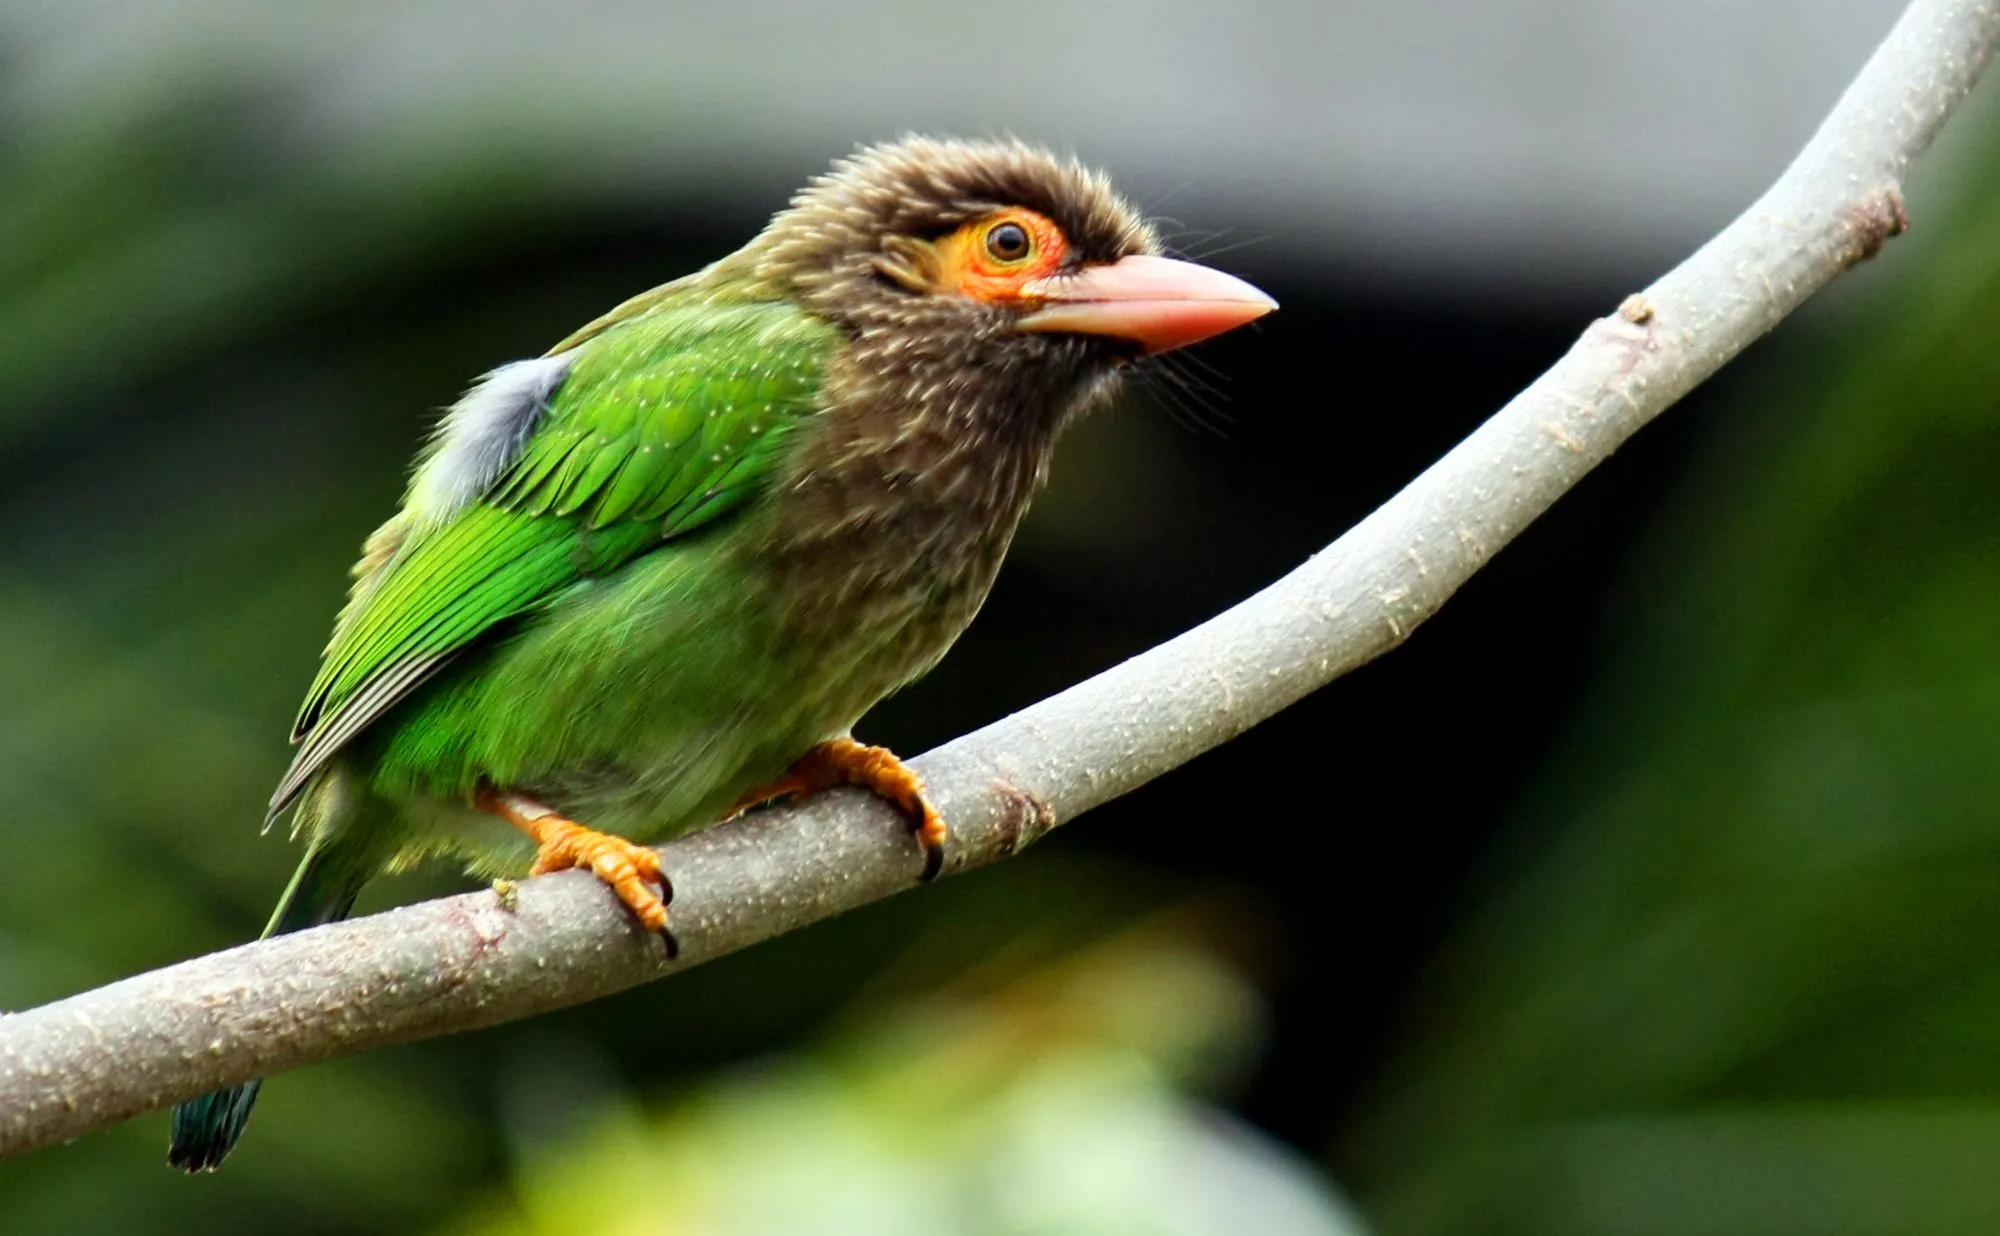 Toucans and the barbet species are near Passerine birds that have a global distribution in the tropics.